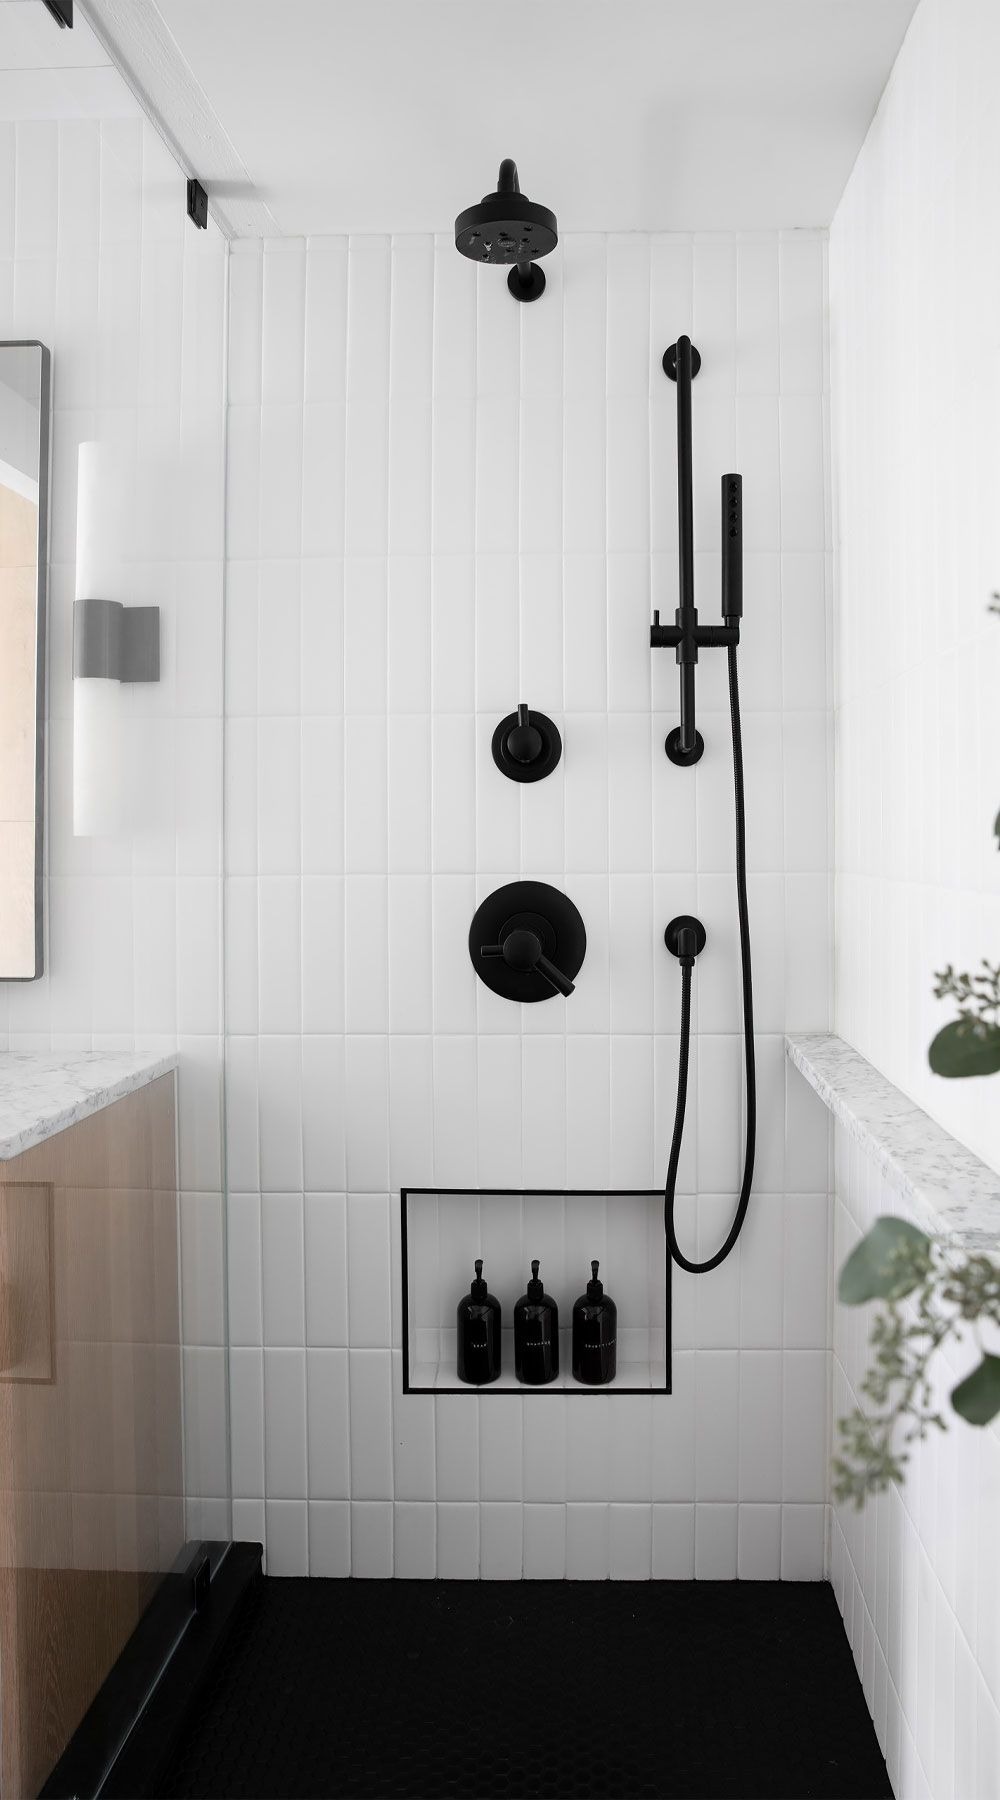 Design A Shower Niche on the Lower Part of the Wall